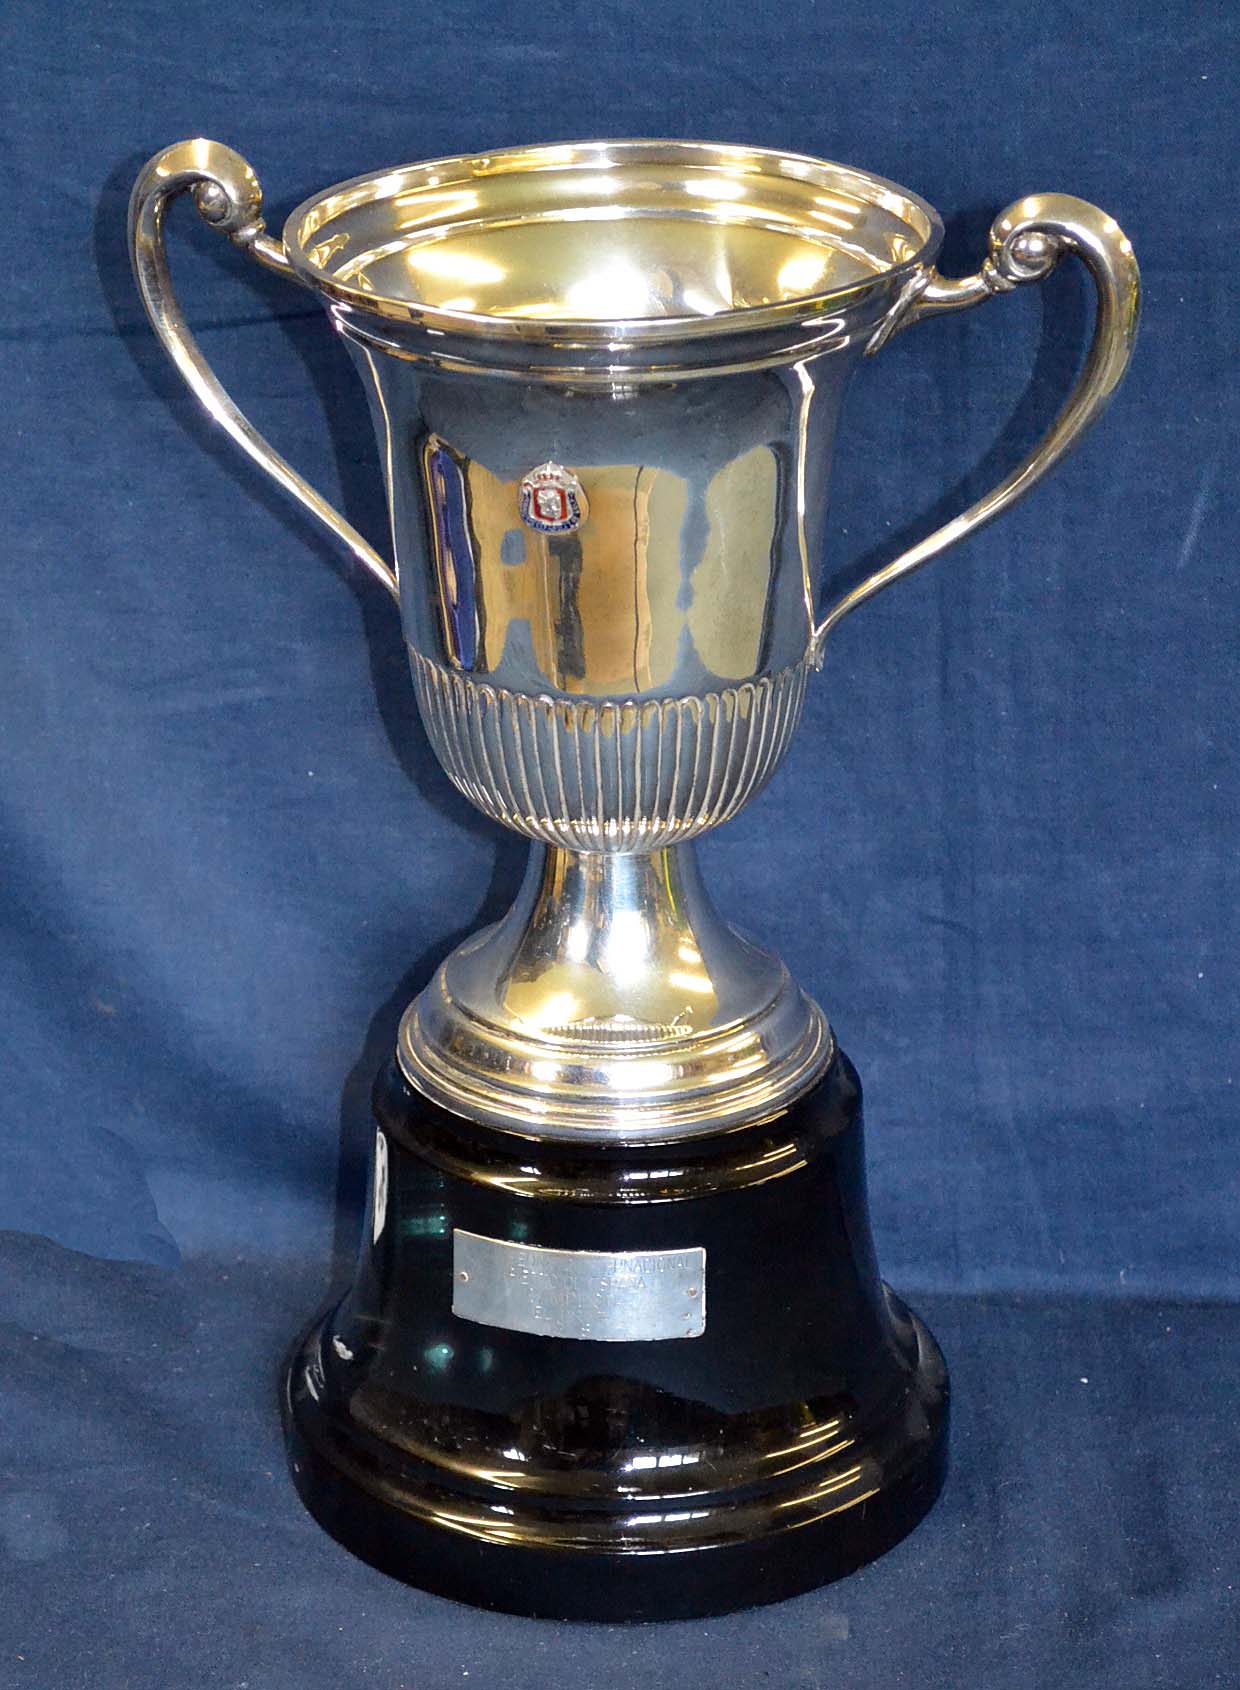 1978 Spanish Open Golf Championship winner` s trophy - won by Brian Barnes the large trophy with the